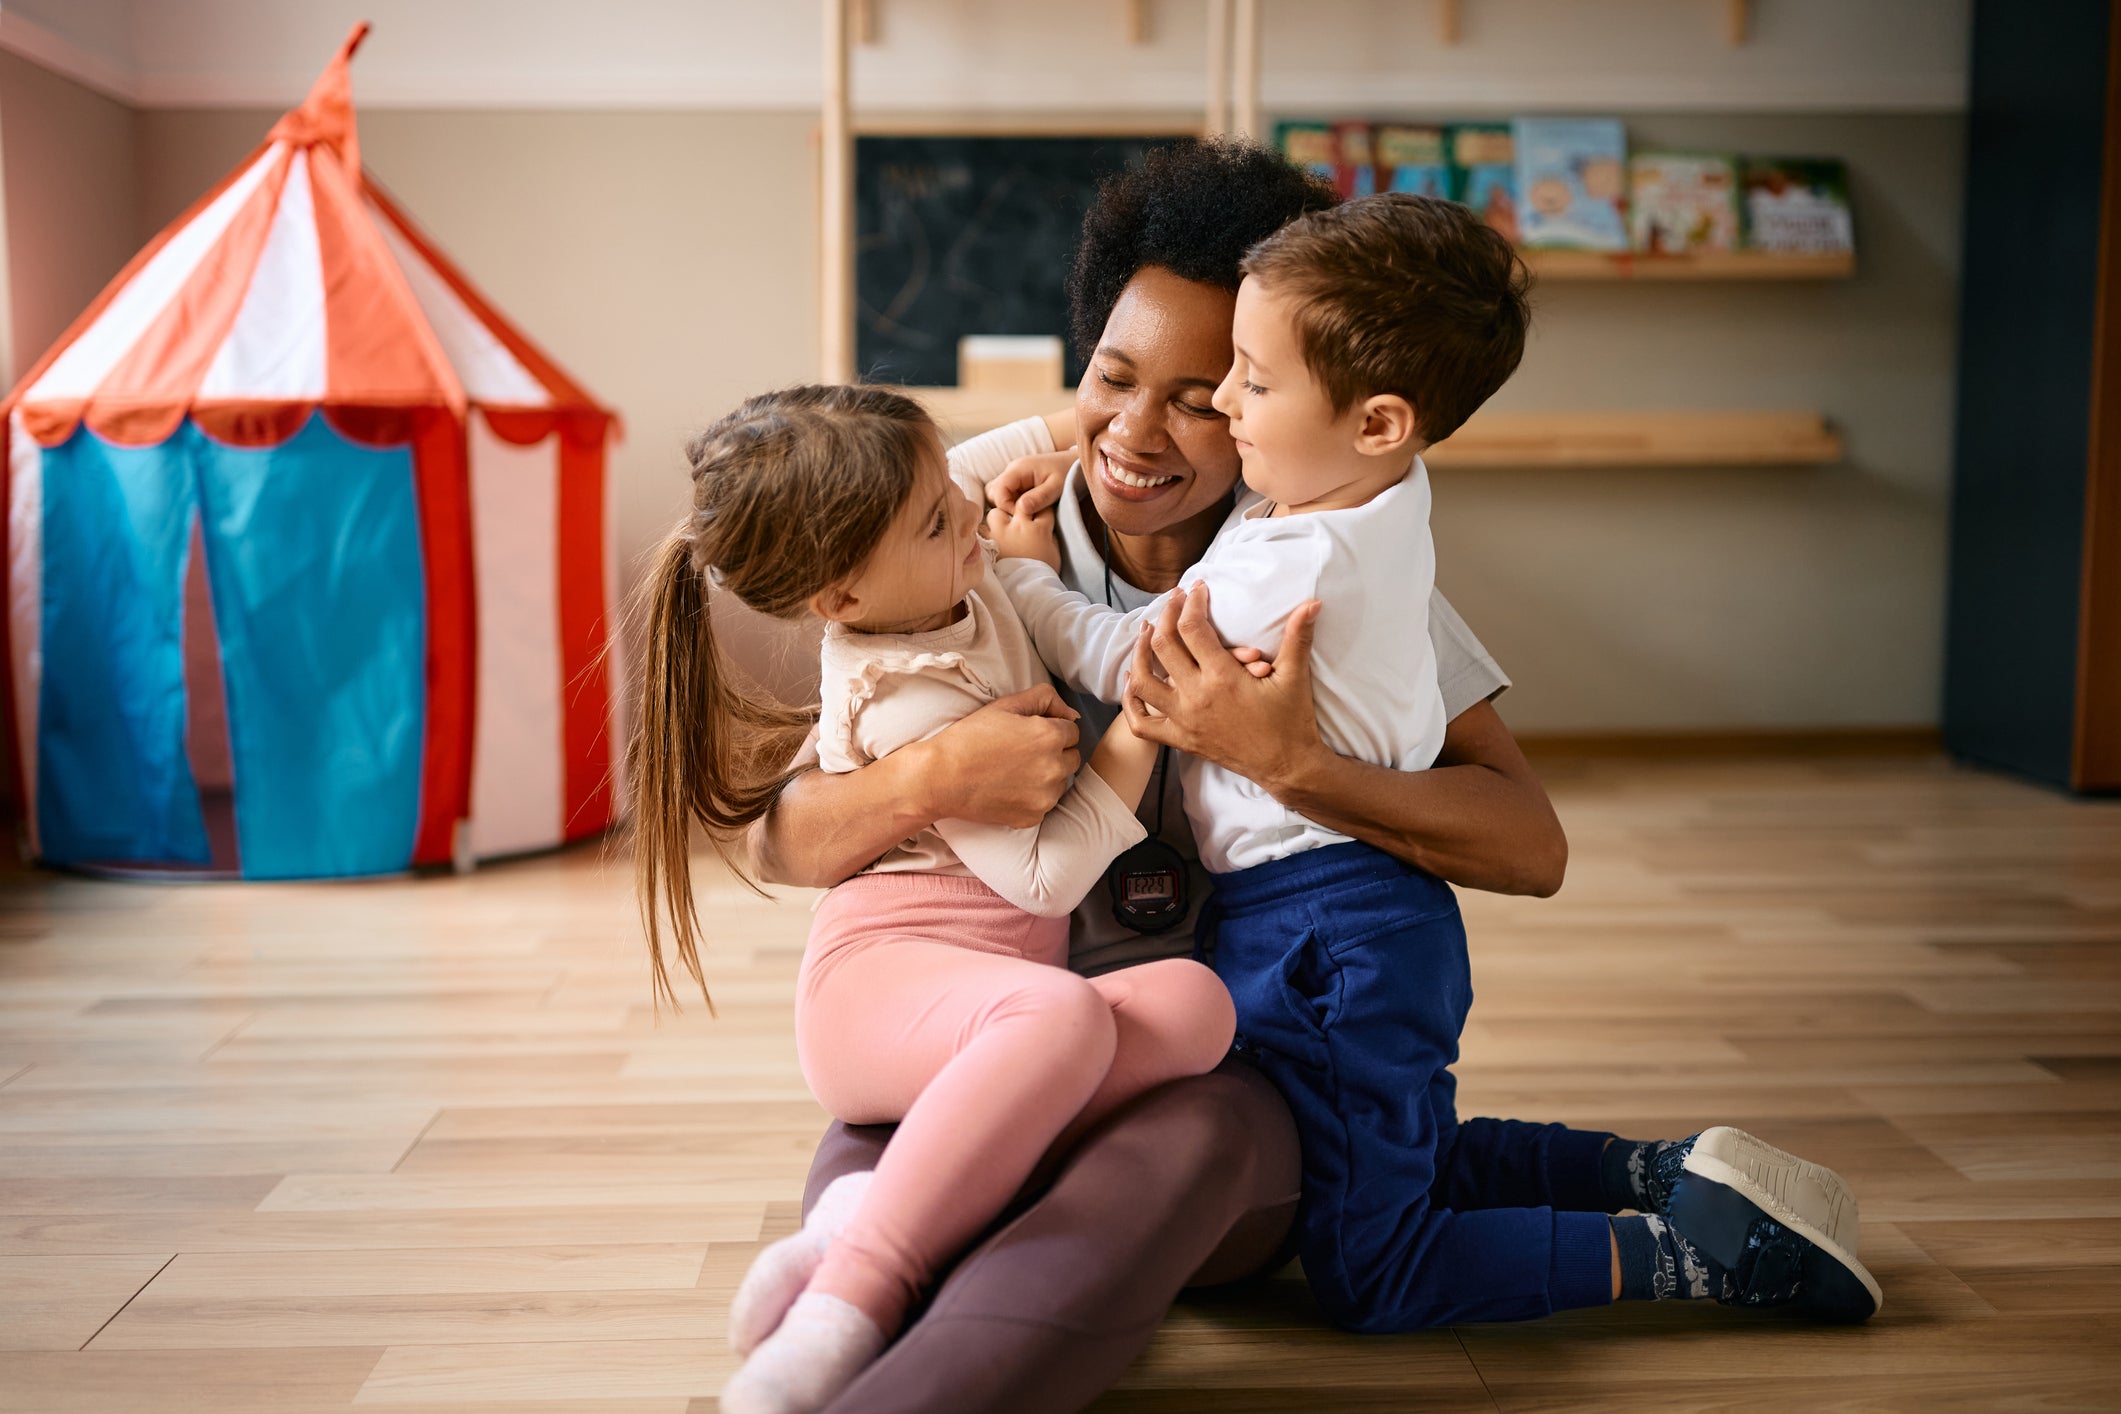 Black teacher embracing two Latino children - one girl wearing pink leggings and white t-shirt and one boy wearing blue pants and white t-shirt on the wooden floor of a classroom